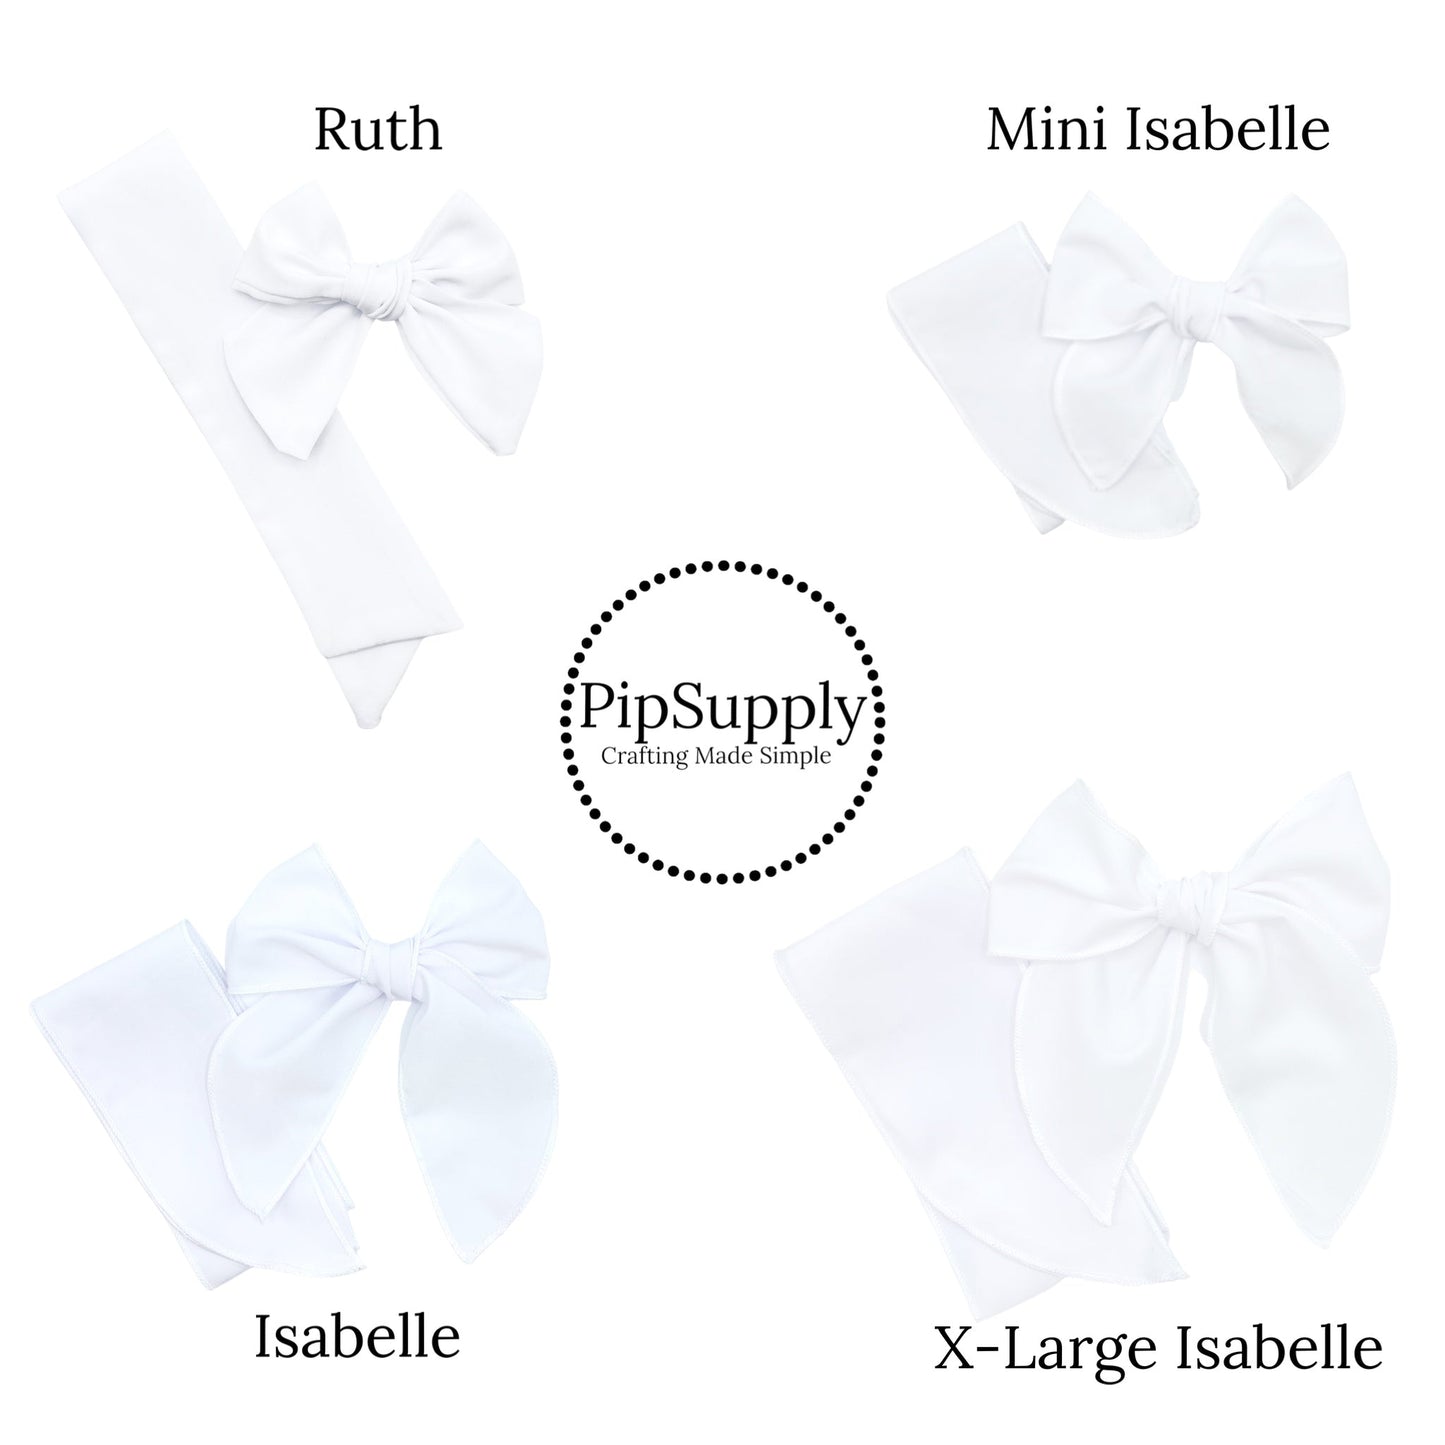 Cute Cottontails Bow Strips